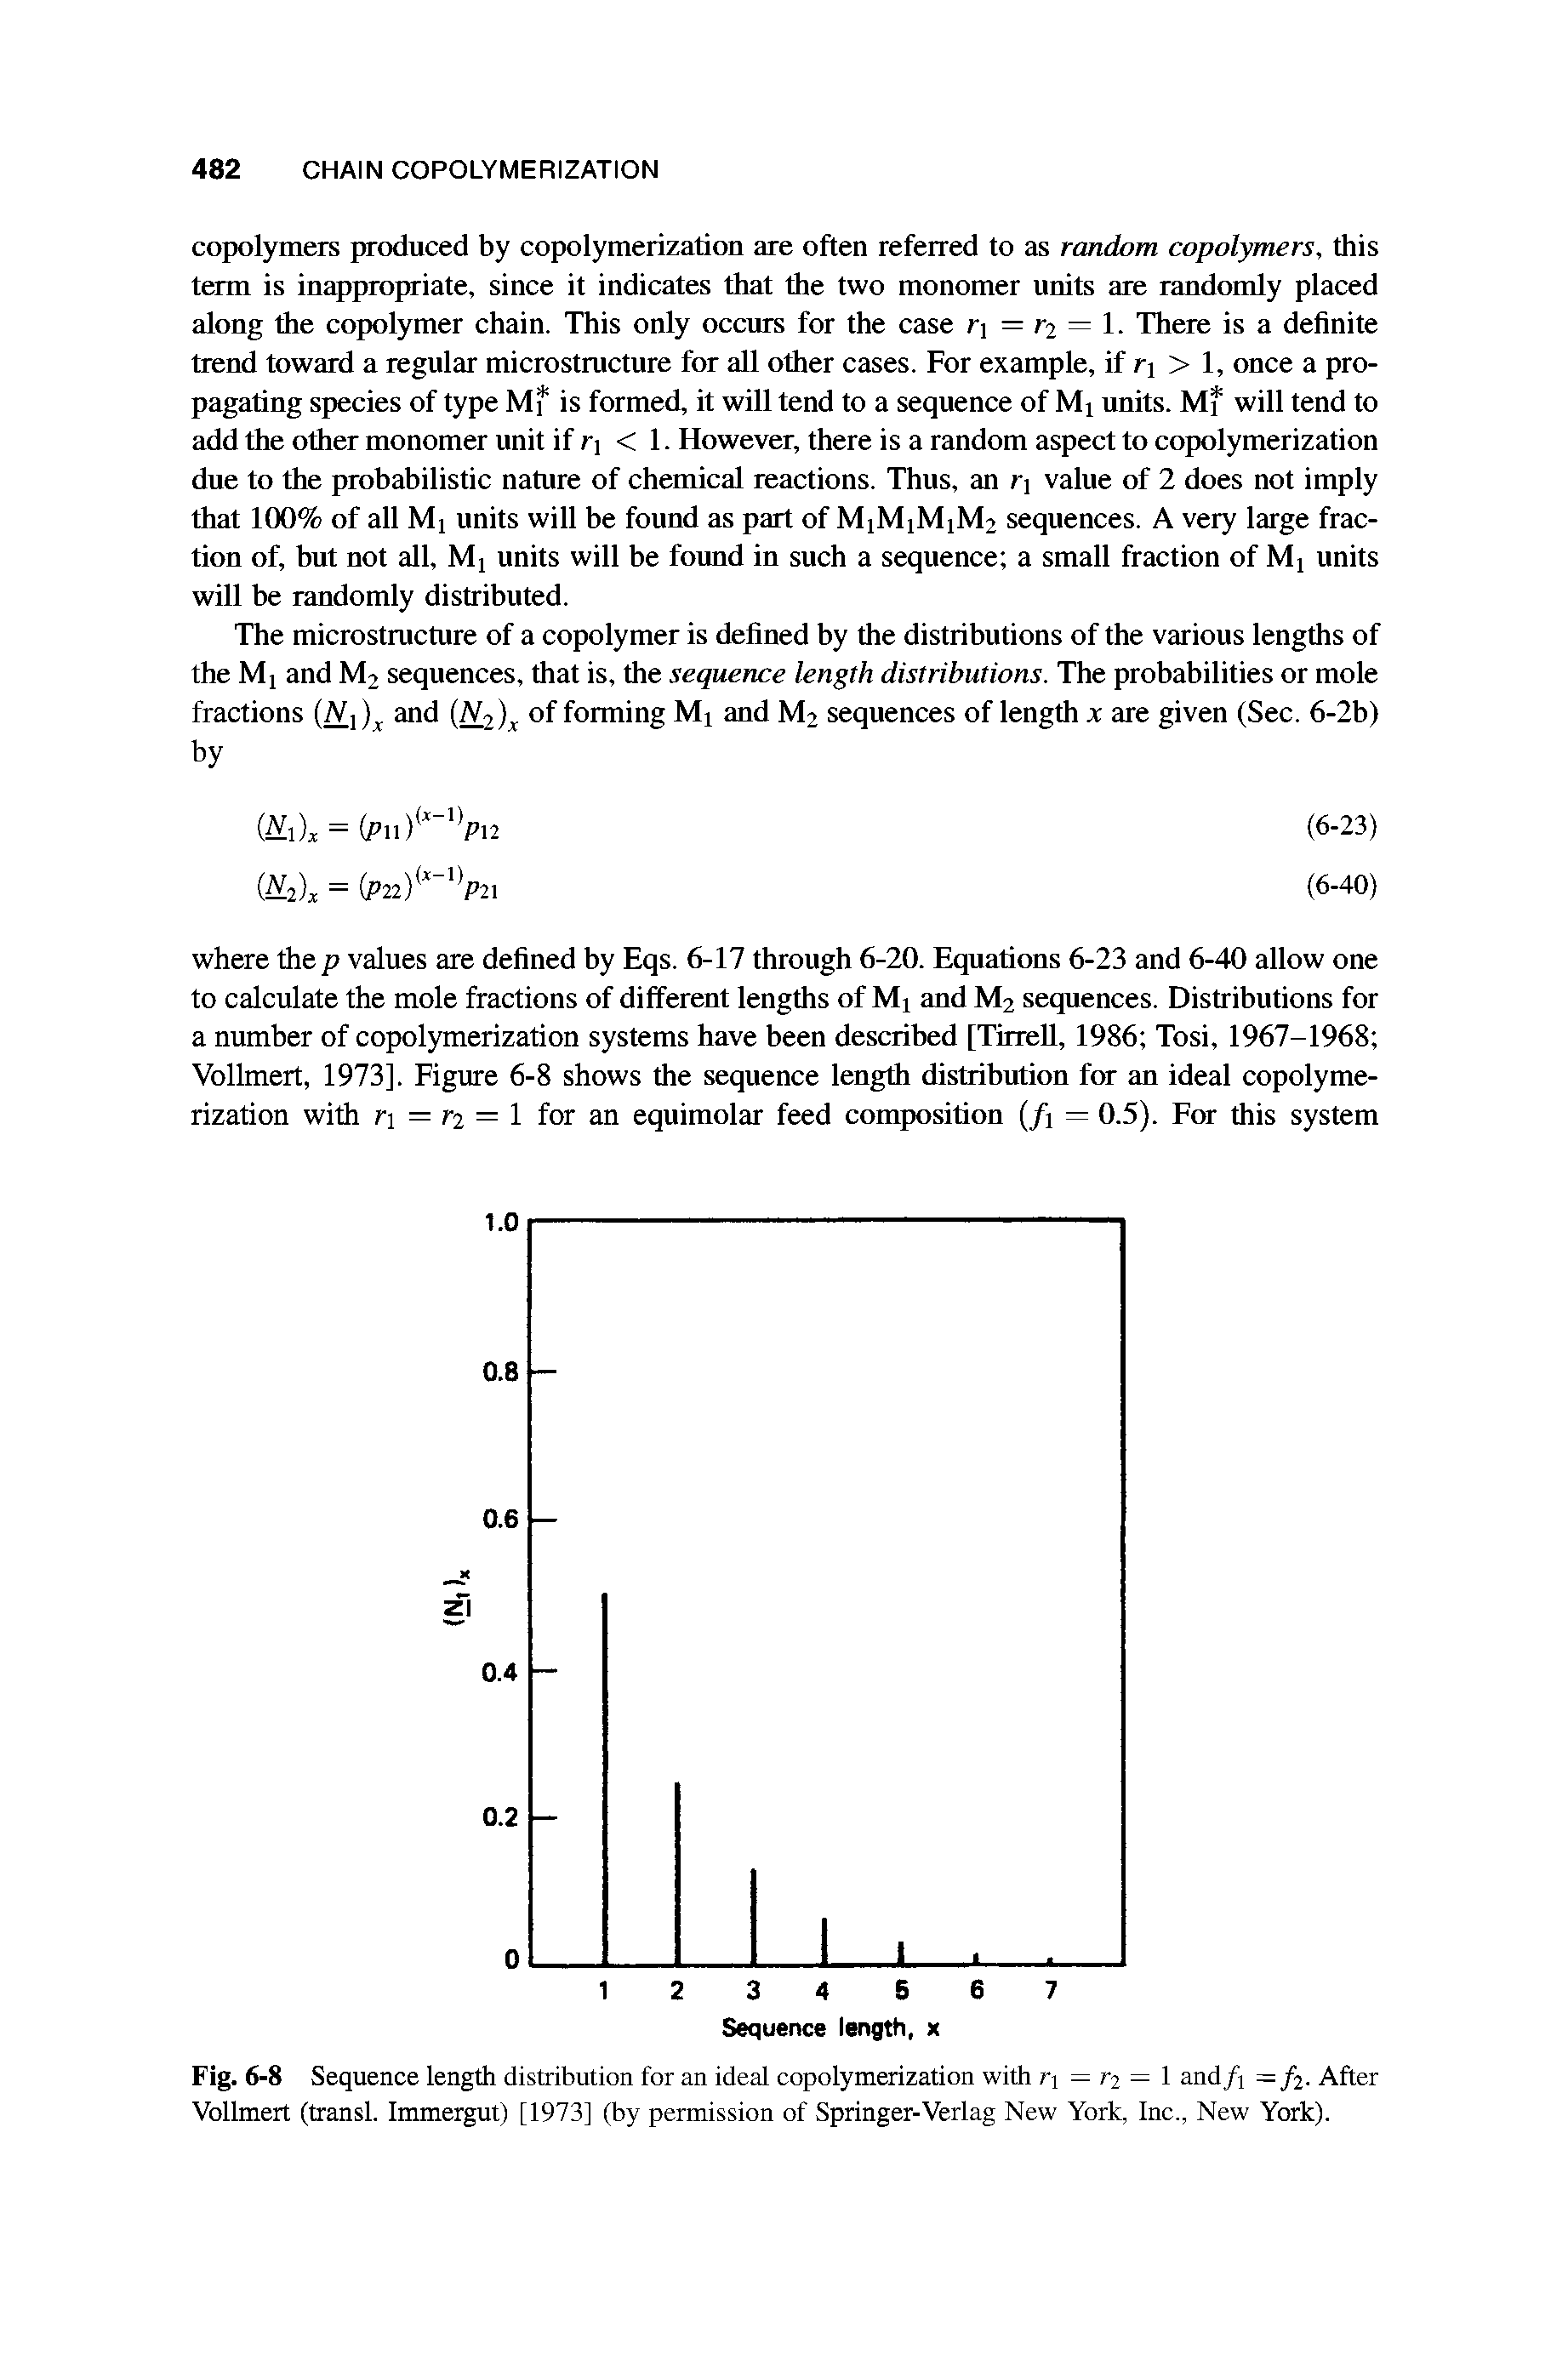 Fig. 6-8 Sequence length distribution for an ideal copolymerization with ri = r2 = 1 and/i =/2. After Vollmert (transl. Immergut) [1973] (by permission of Springer-Verlag New York, Inc., New York).